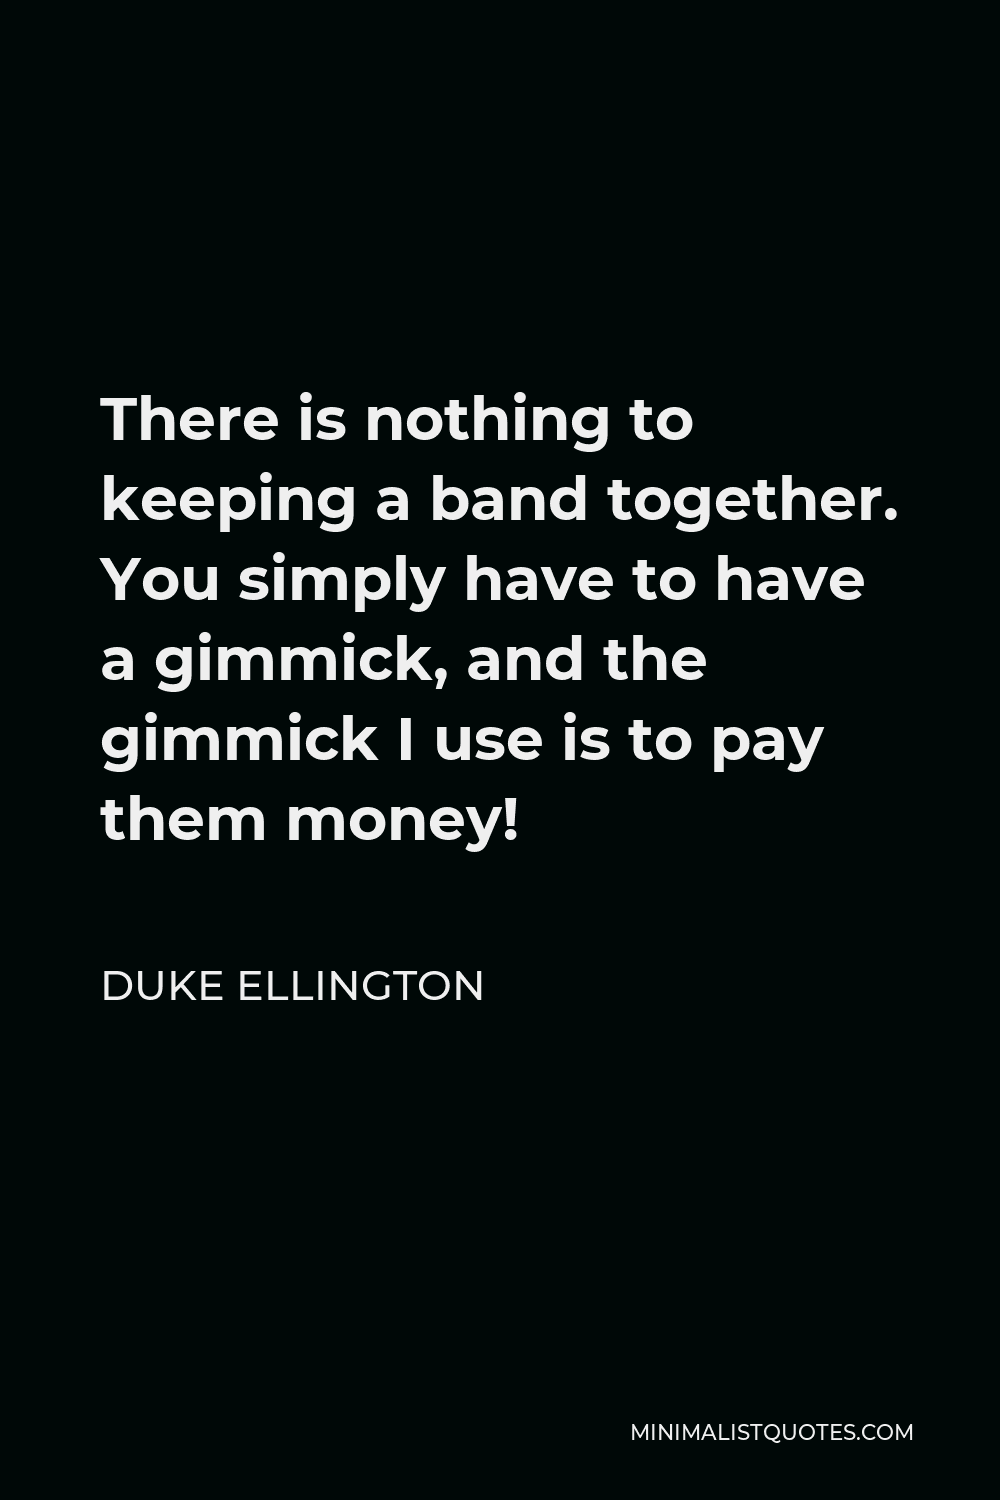 Duke Ellington Quote - There is nothing to keeping a band together. You simply have to have a gimmick, and the gimmick I use is to pay them money!